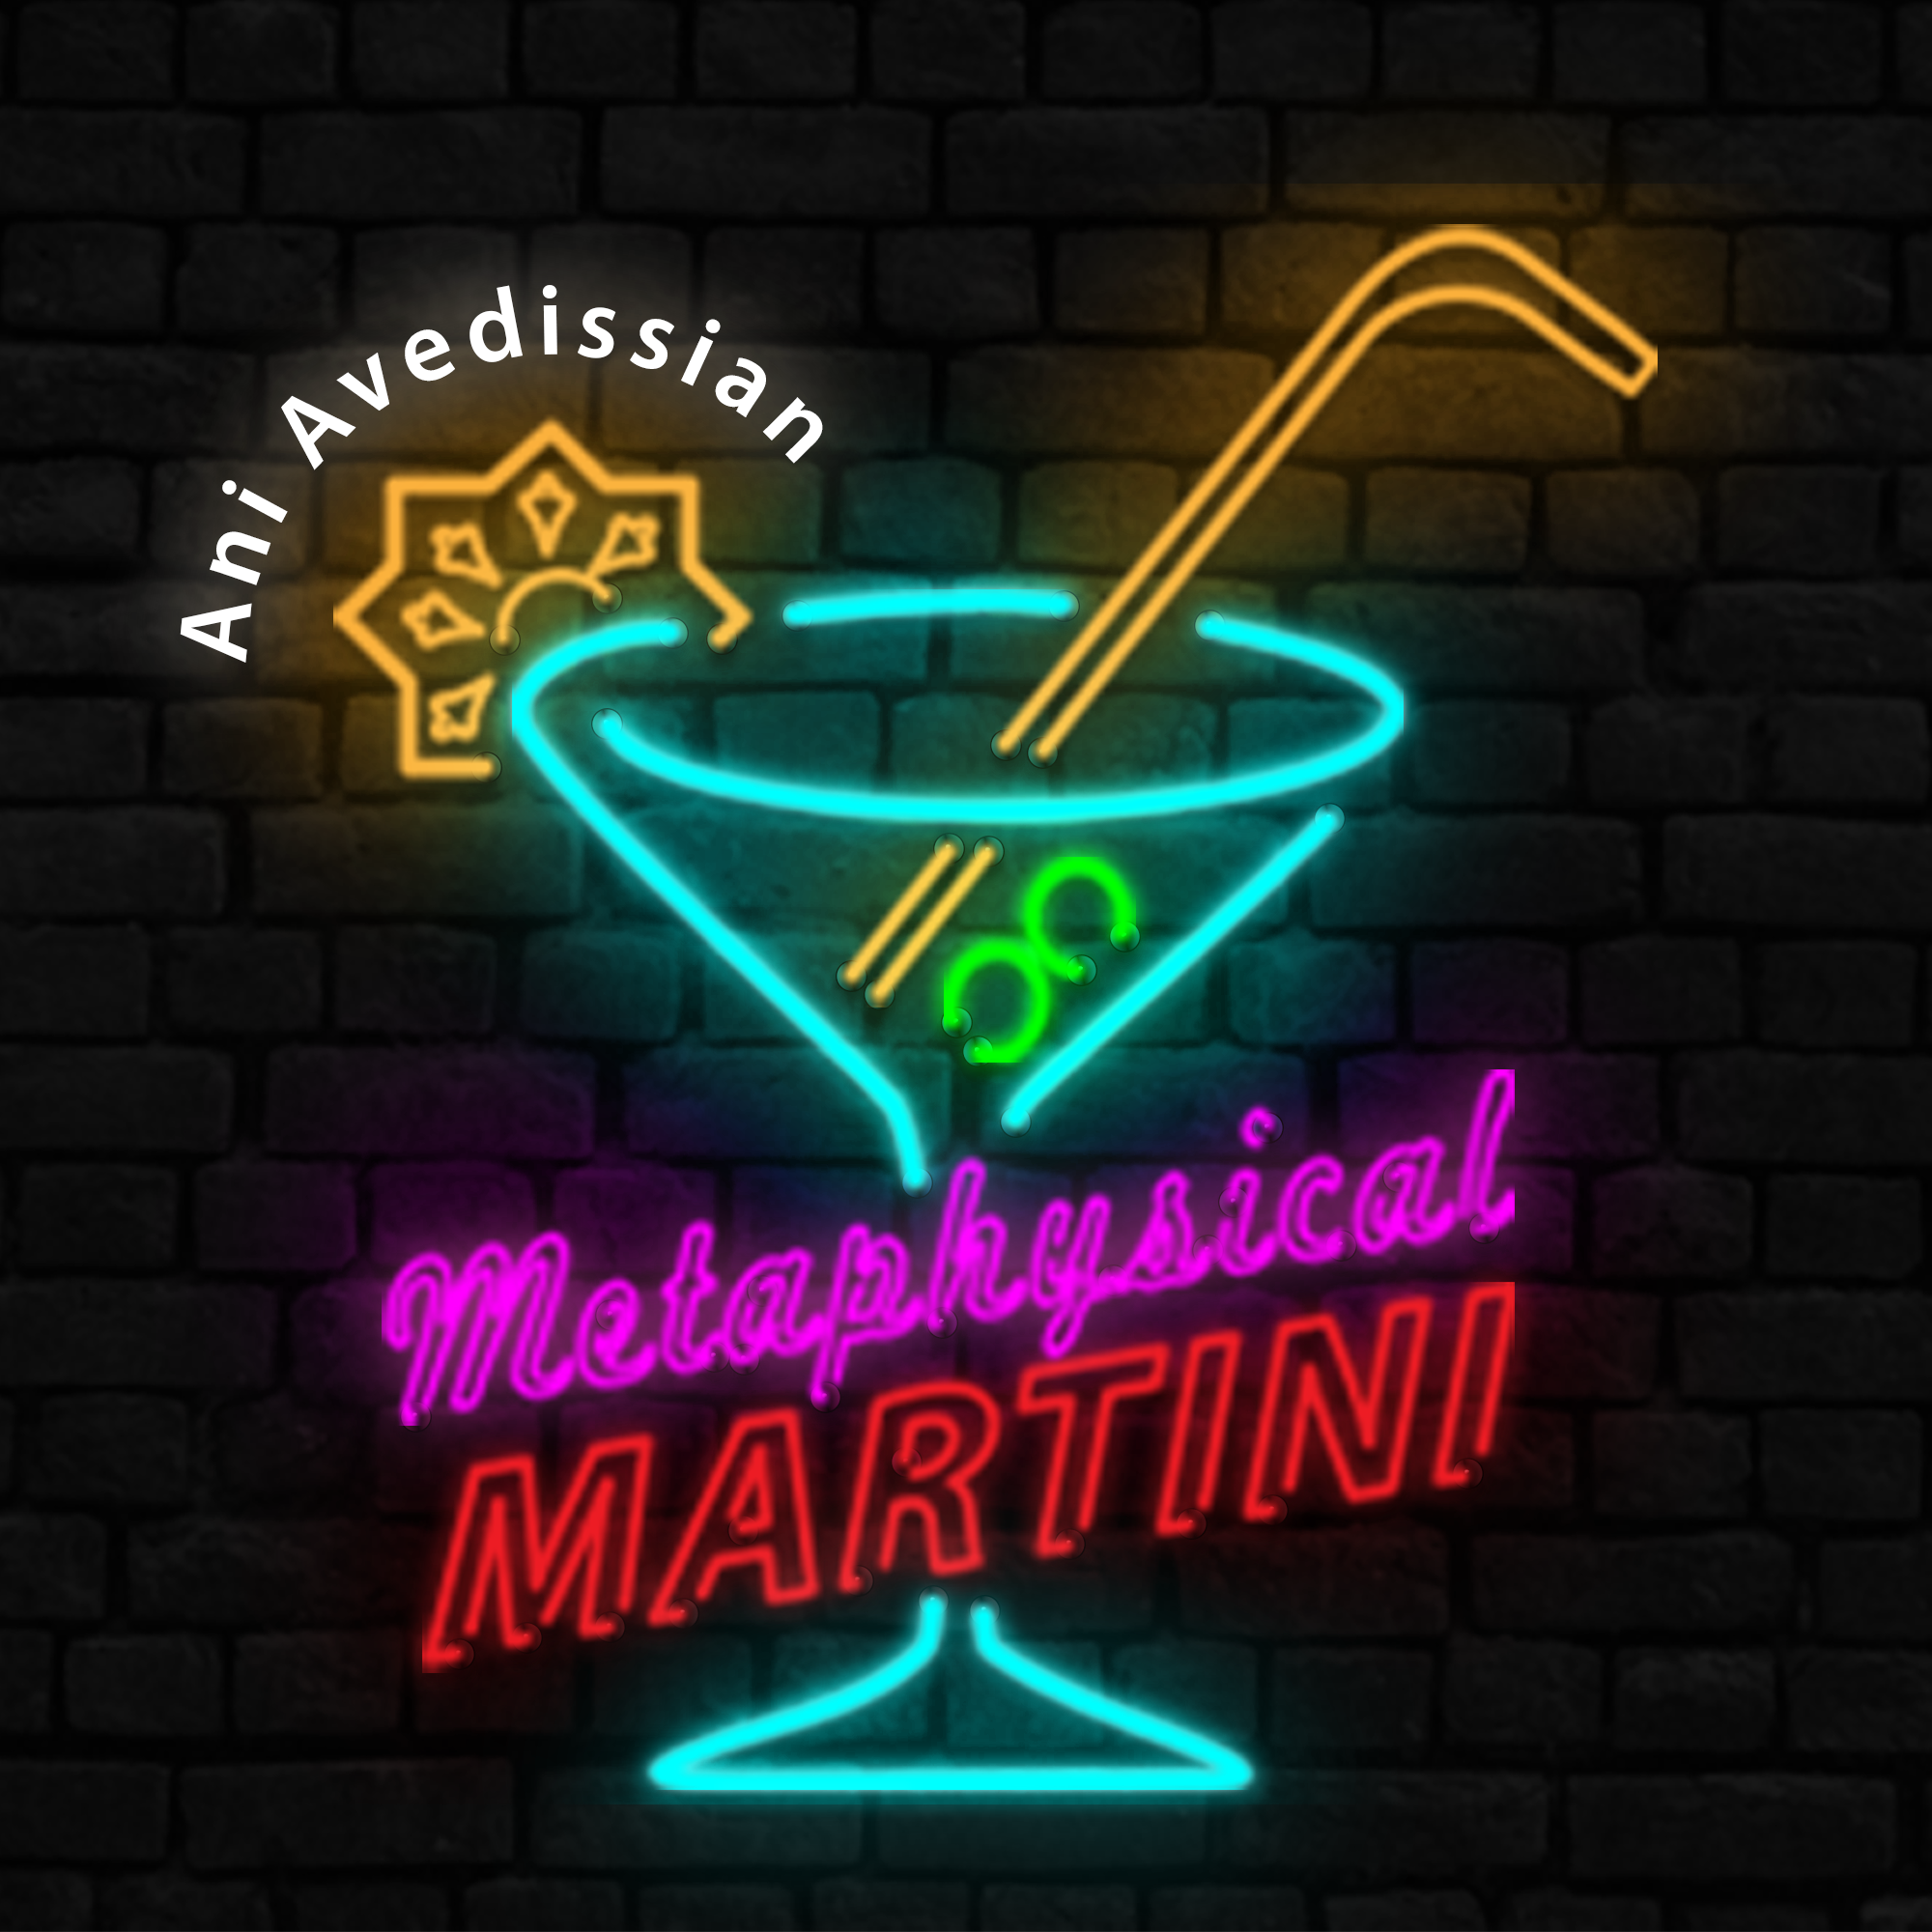 "Metaphysical Martini"   01/04/2023  - We are NOT obliged to tolerate immorality and insanity!